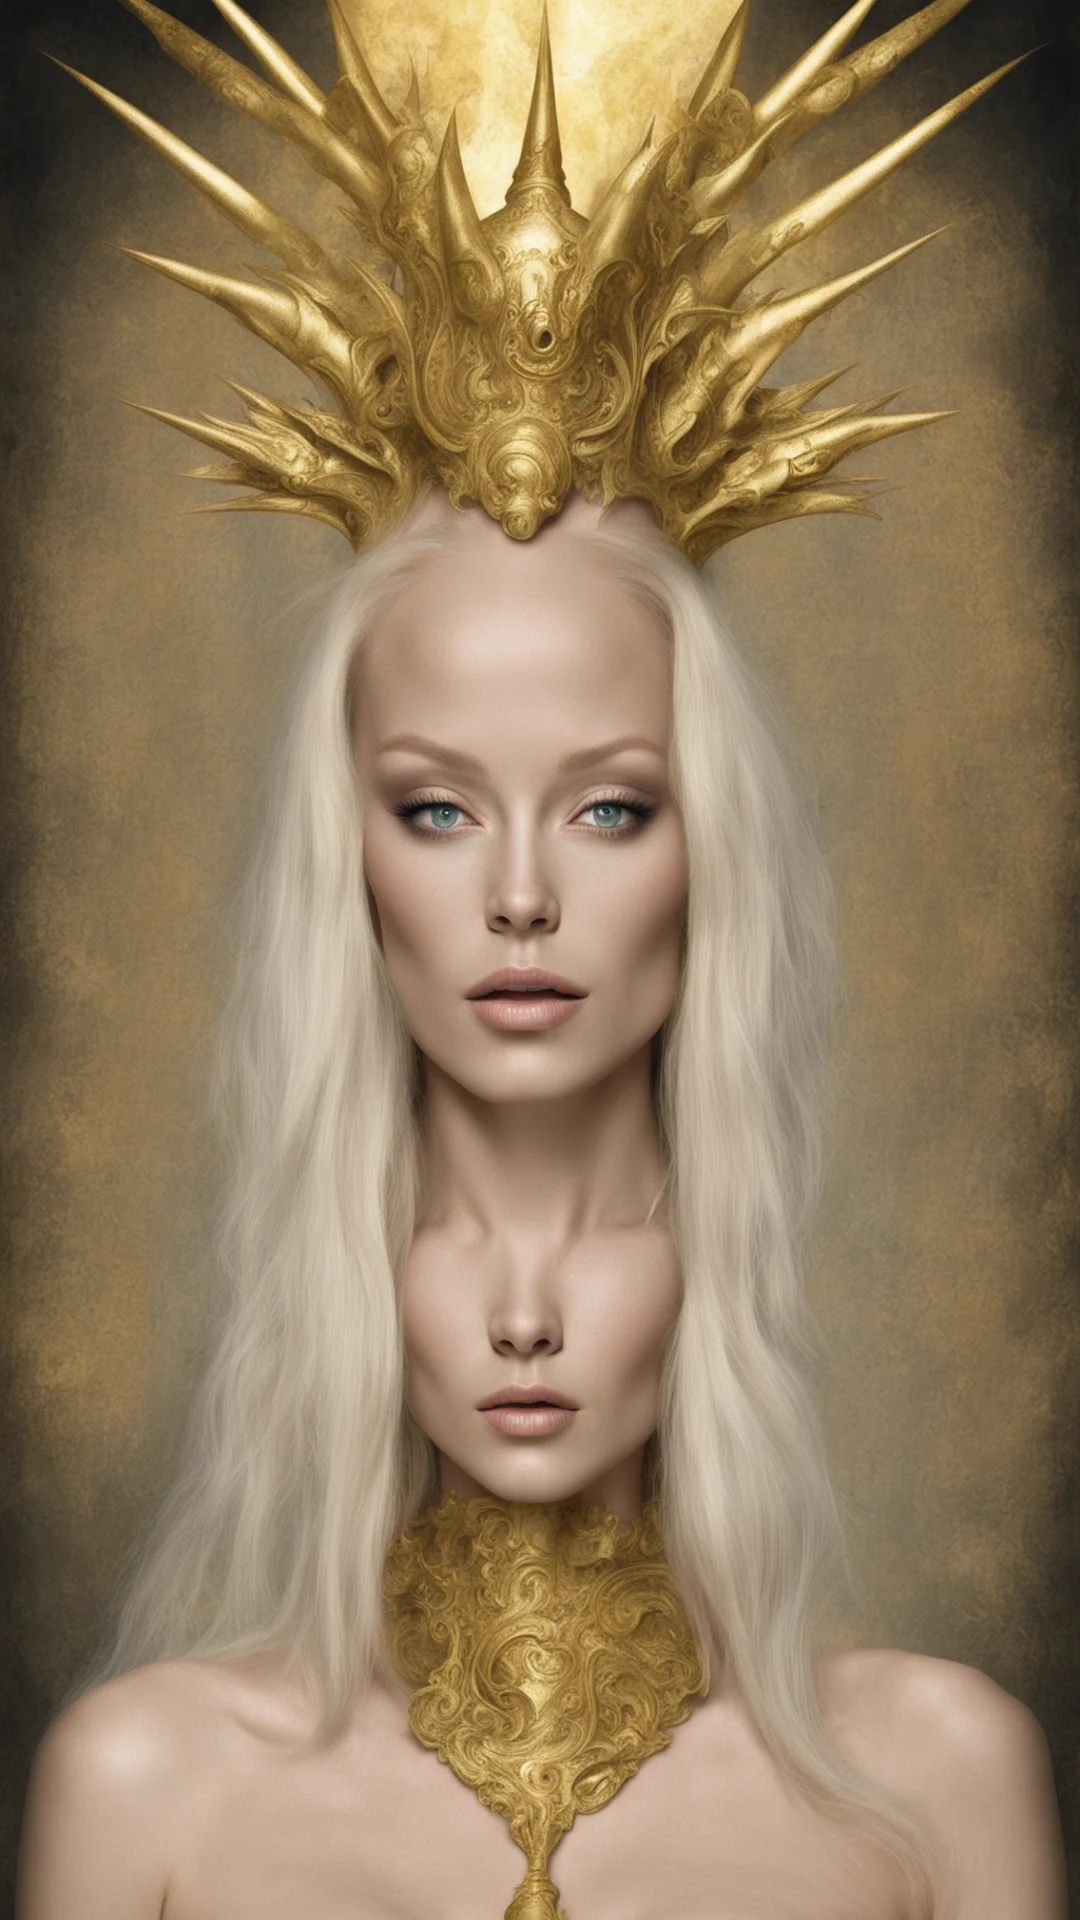 jenna jameson as an alien queen insane resolution golden ratio sunrays cezanne amazing awesome portrait 2 tall